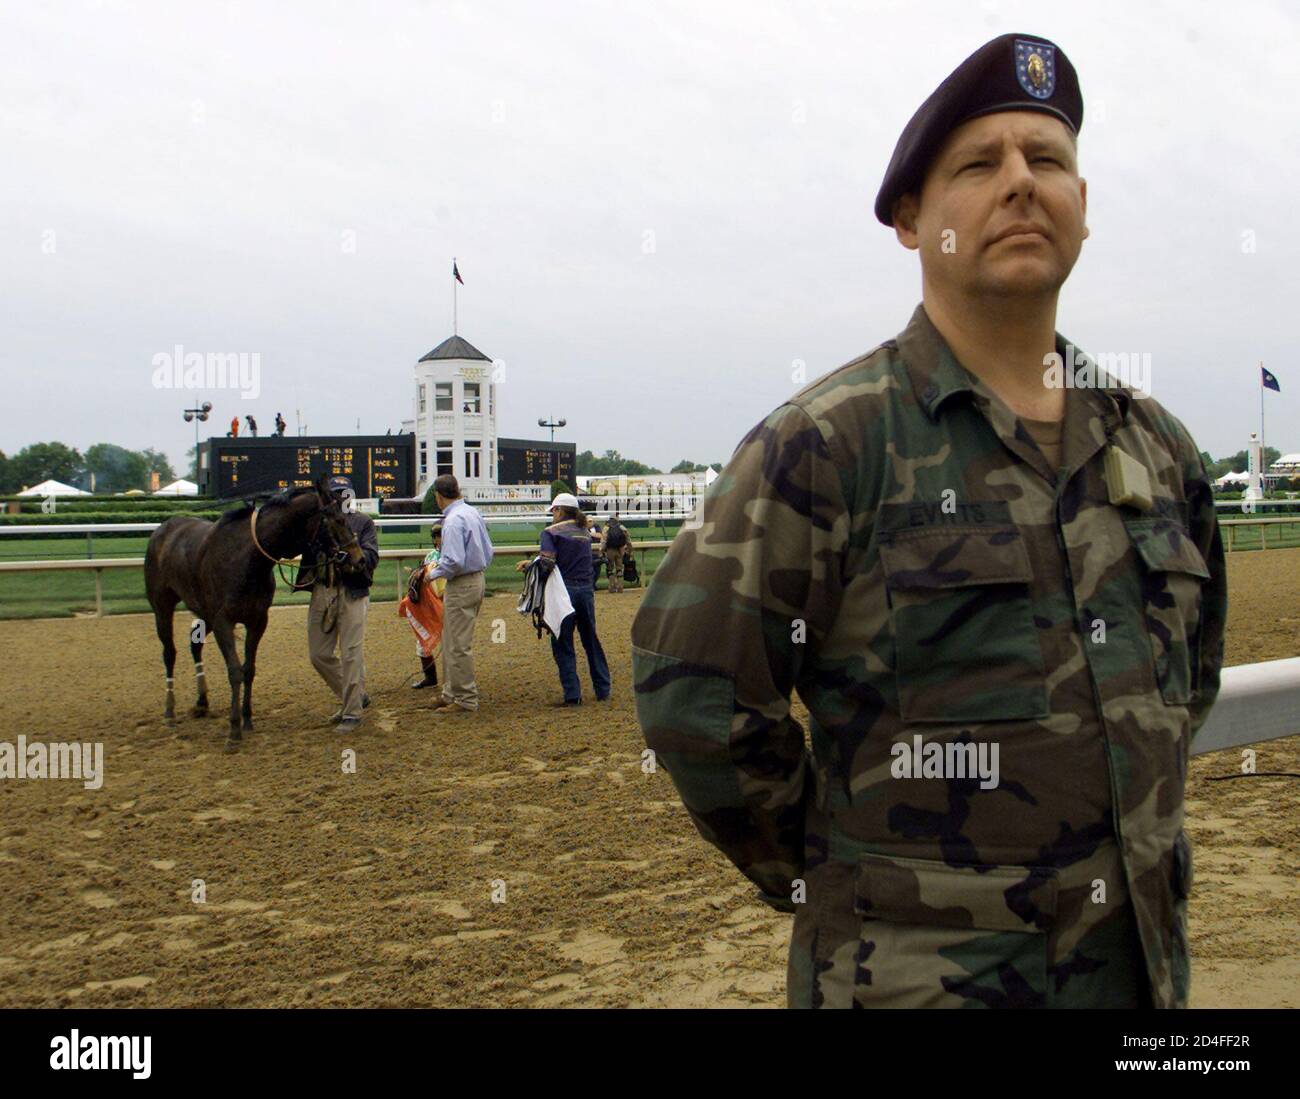 Spc. Mark Evitts, a military police member from the 223rd Company of the Kentucky National Guard, stands guard at trackside of Churchill Downs in Louisville May 3, 2002. The 128th Kentucky Derby will be run May 4 with heightened security. REUTERS/Tami Chappell  PJ Stock Photo